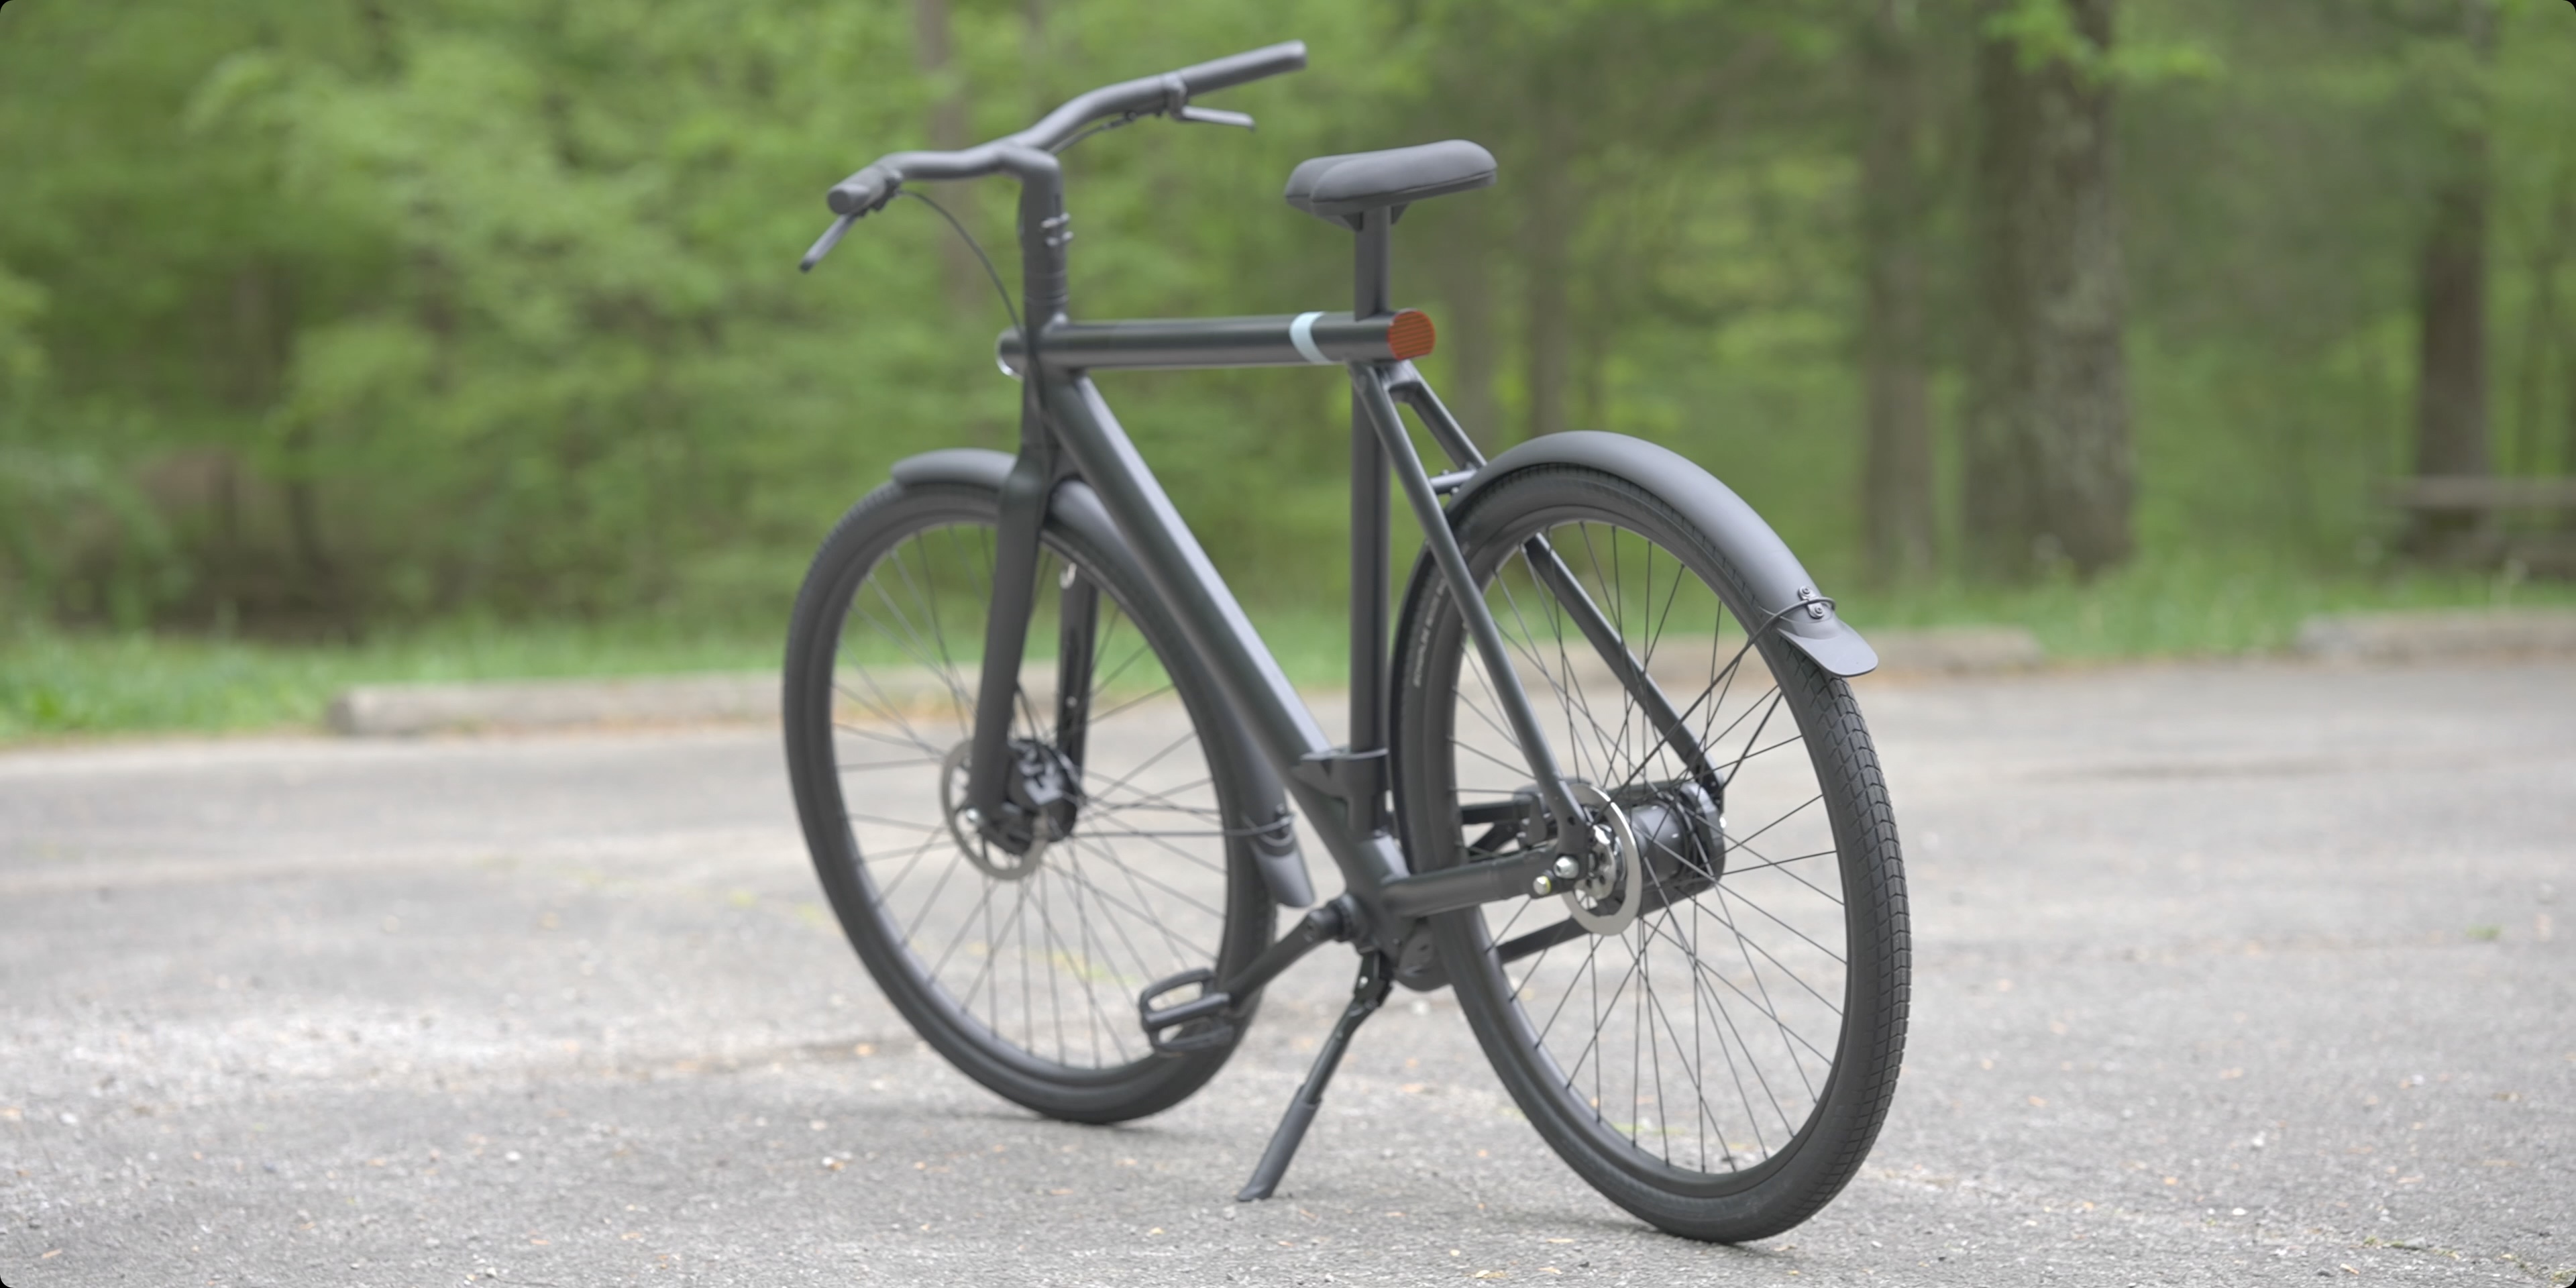 VanMoof S3 impressions: A ridiculously good-looking e-bike with 